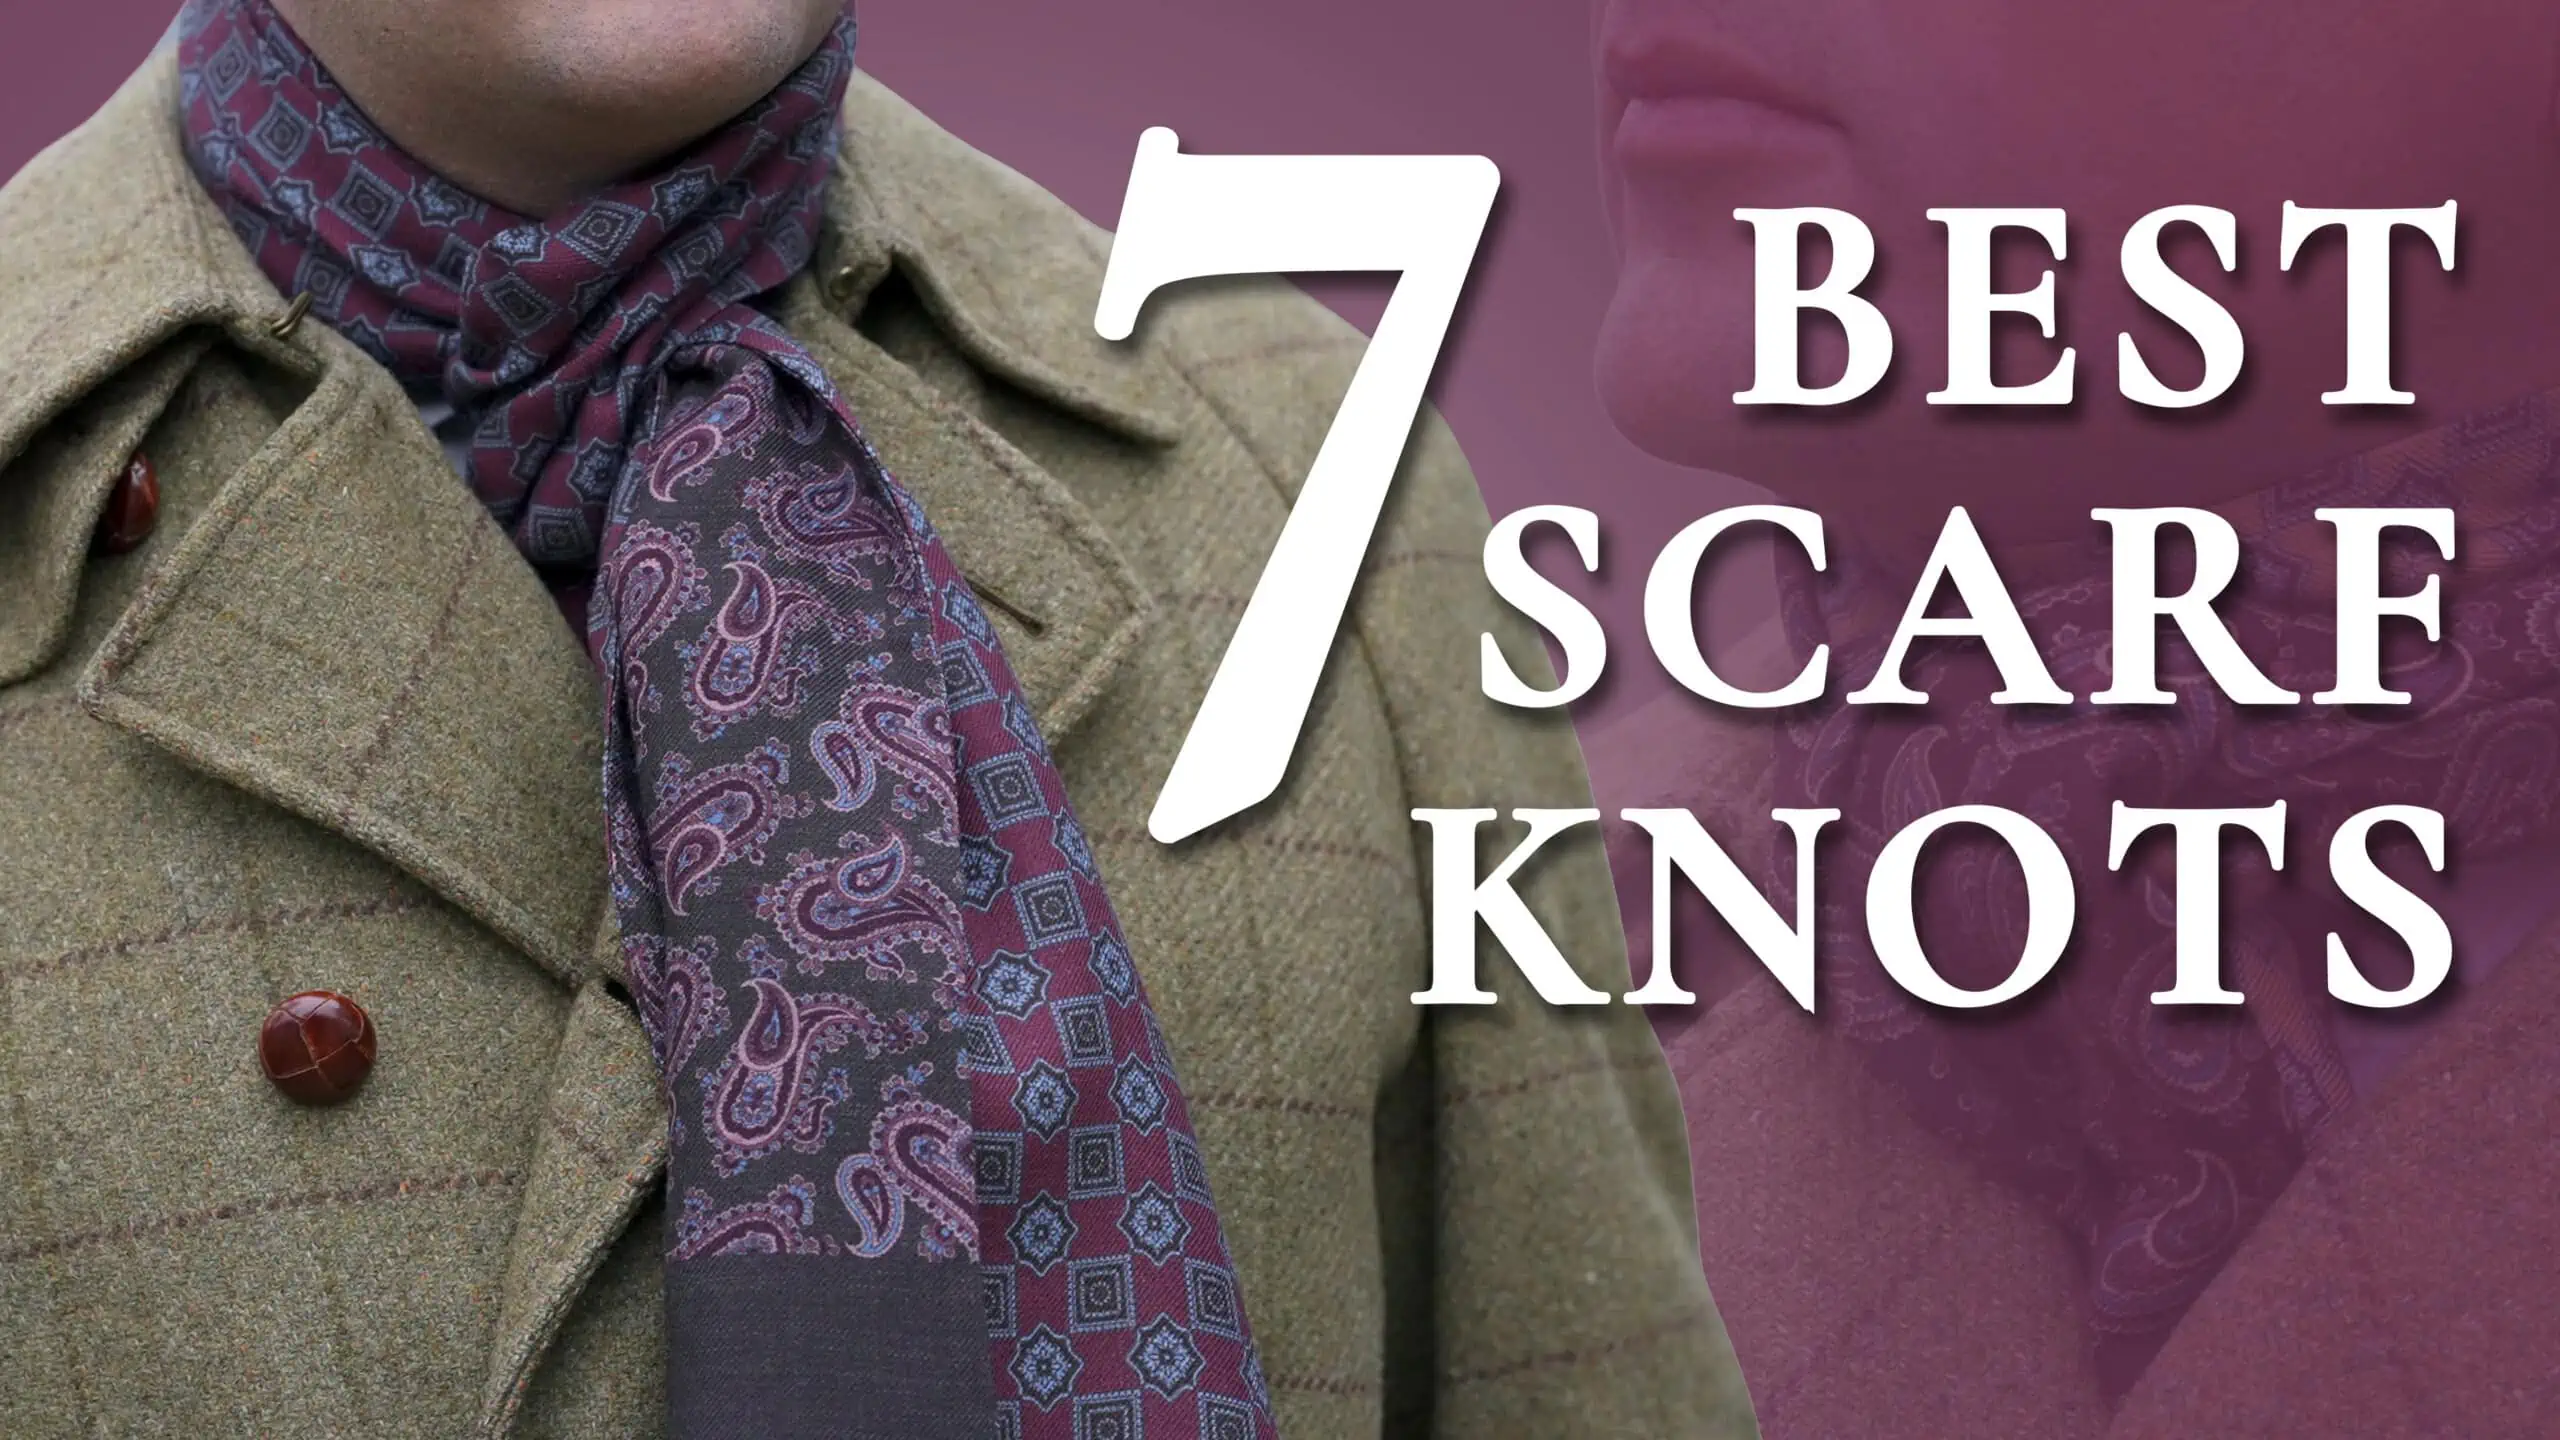 7 best scarf knots 3840x2160 wp scaled